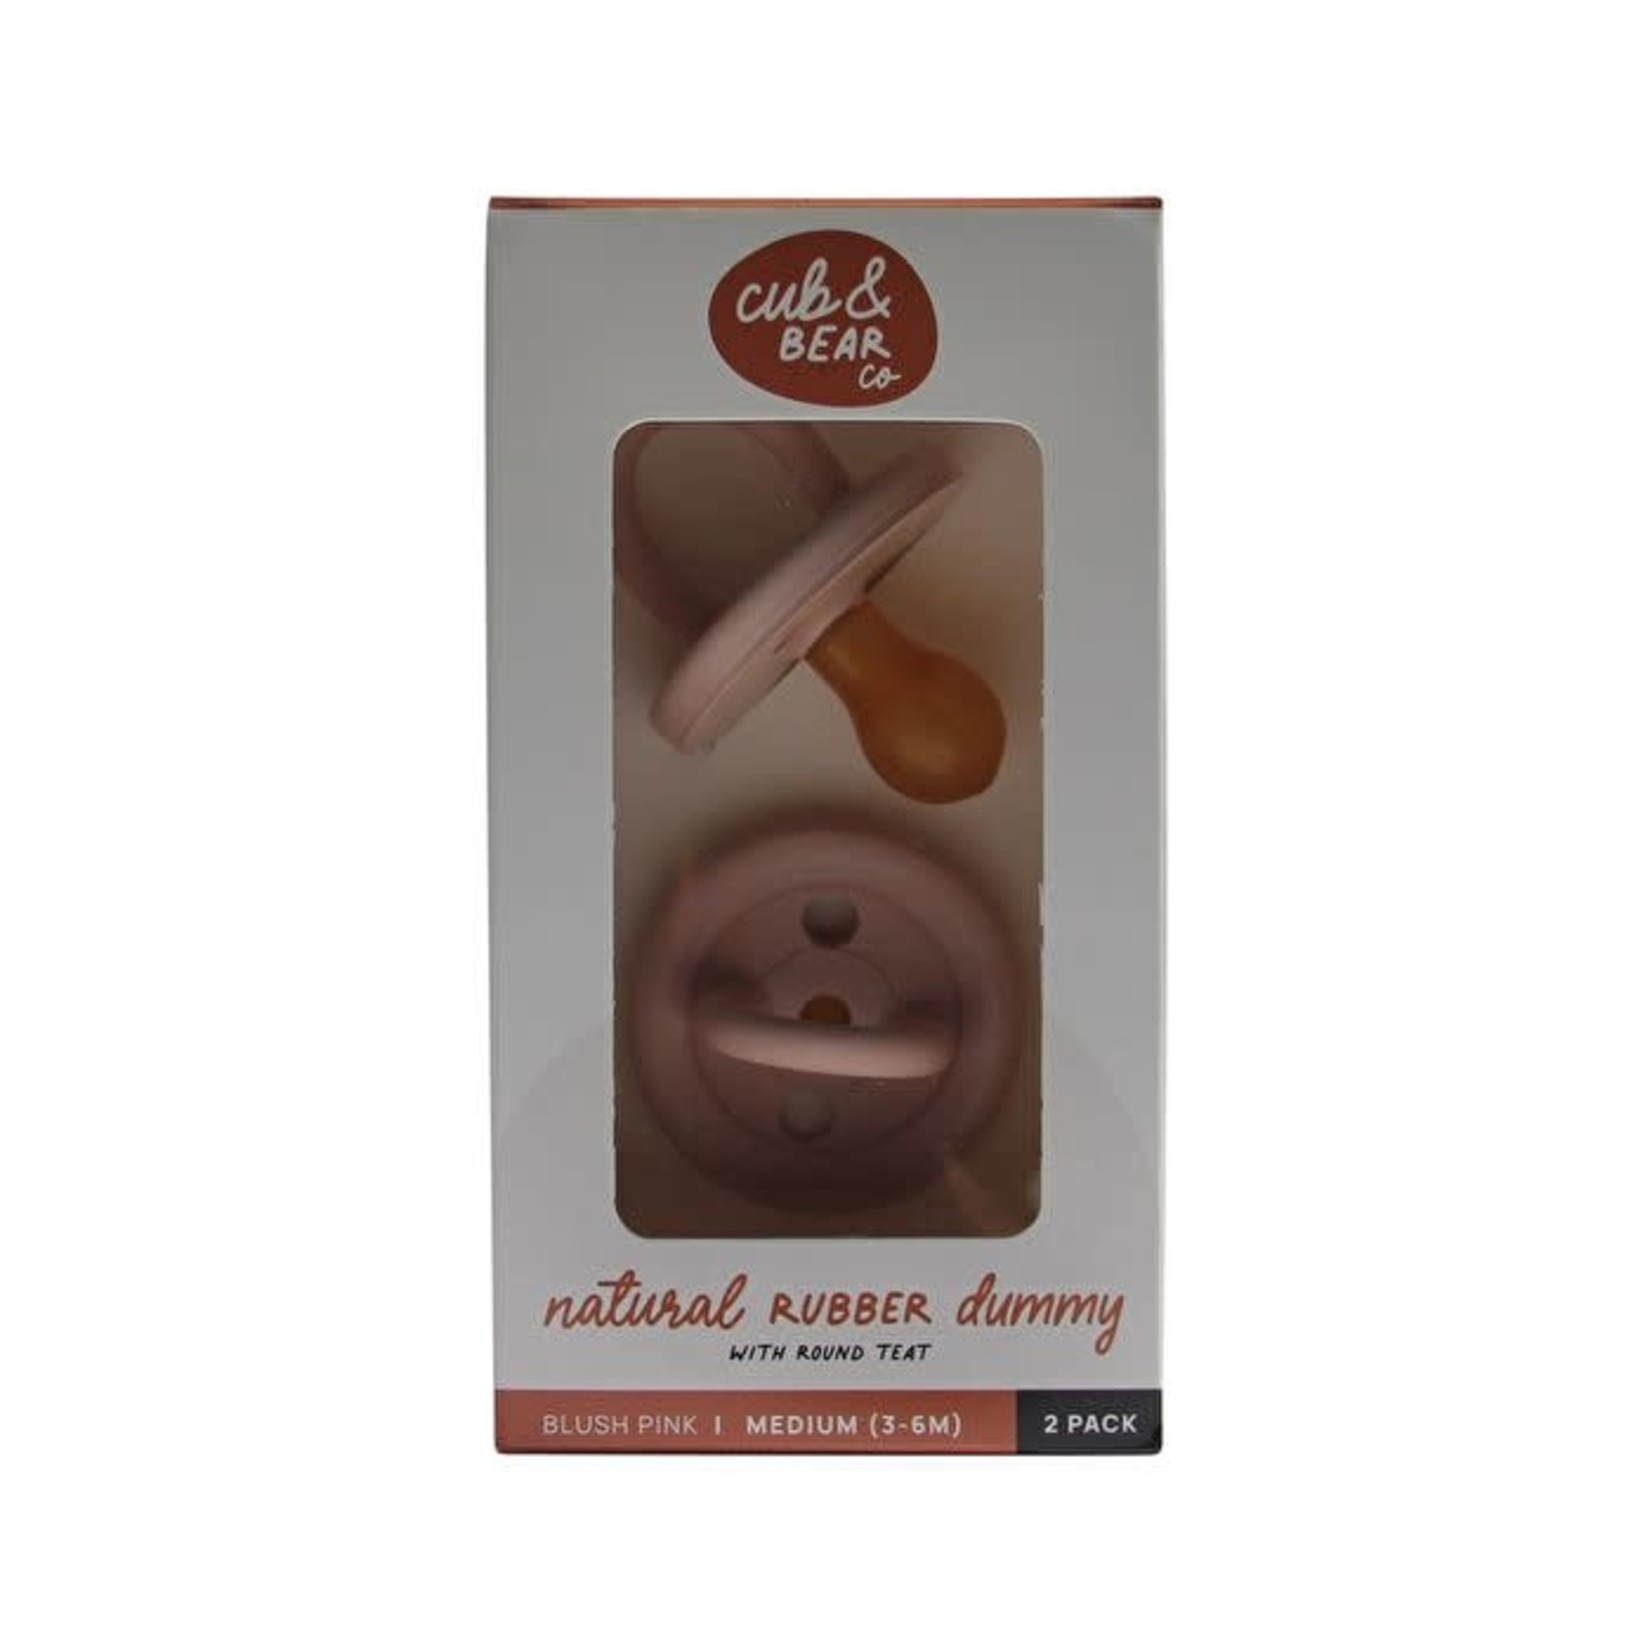 Cub & Bear Co Cub & Bear Co Natural Rubber Dummy Round Teat Twin Pack Blush Pink